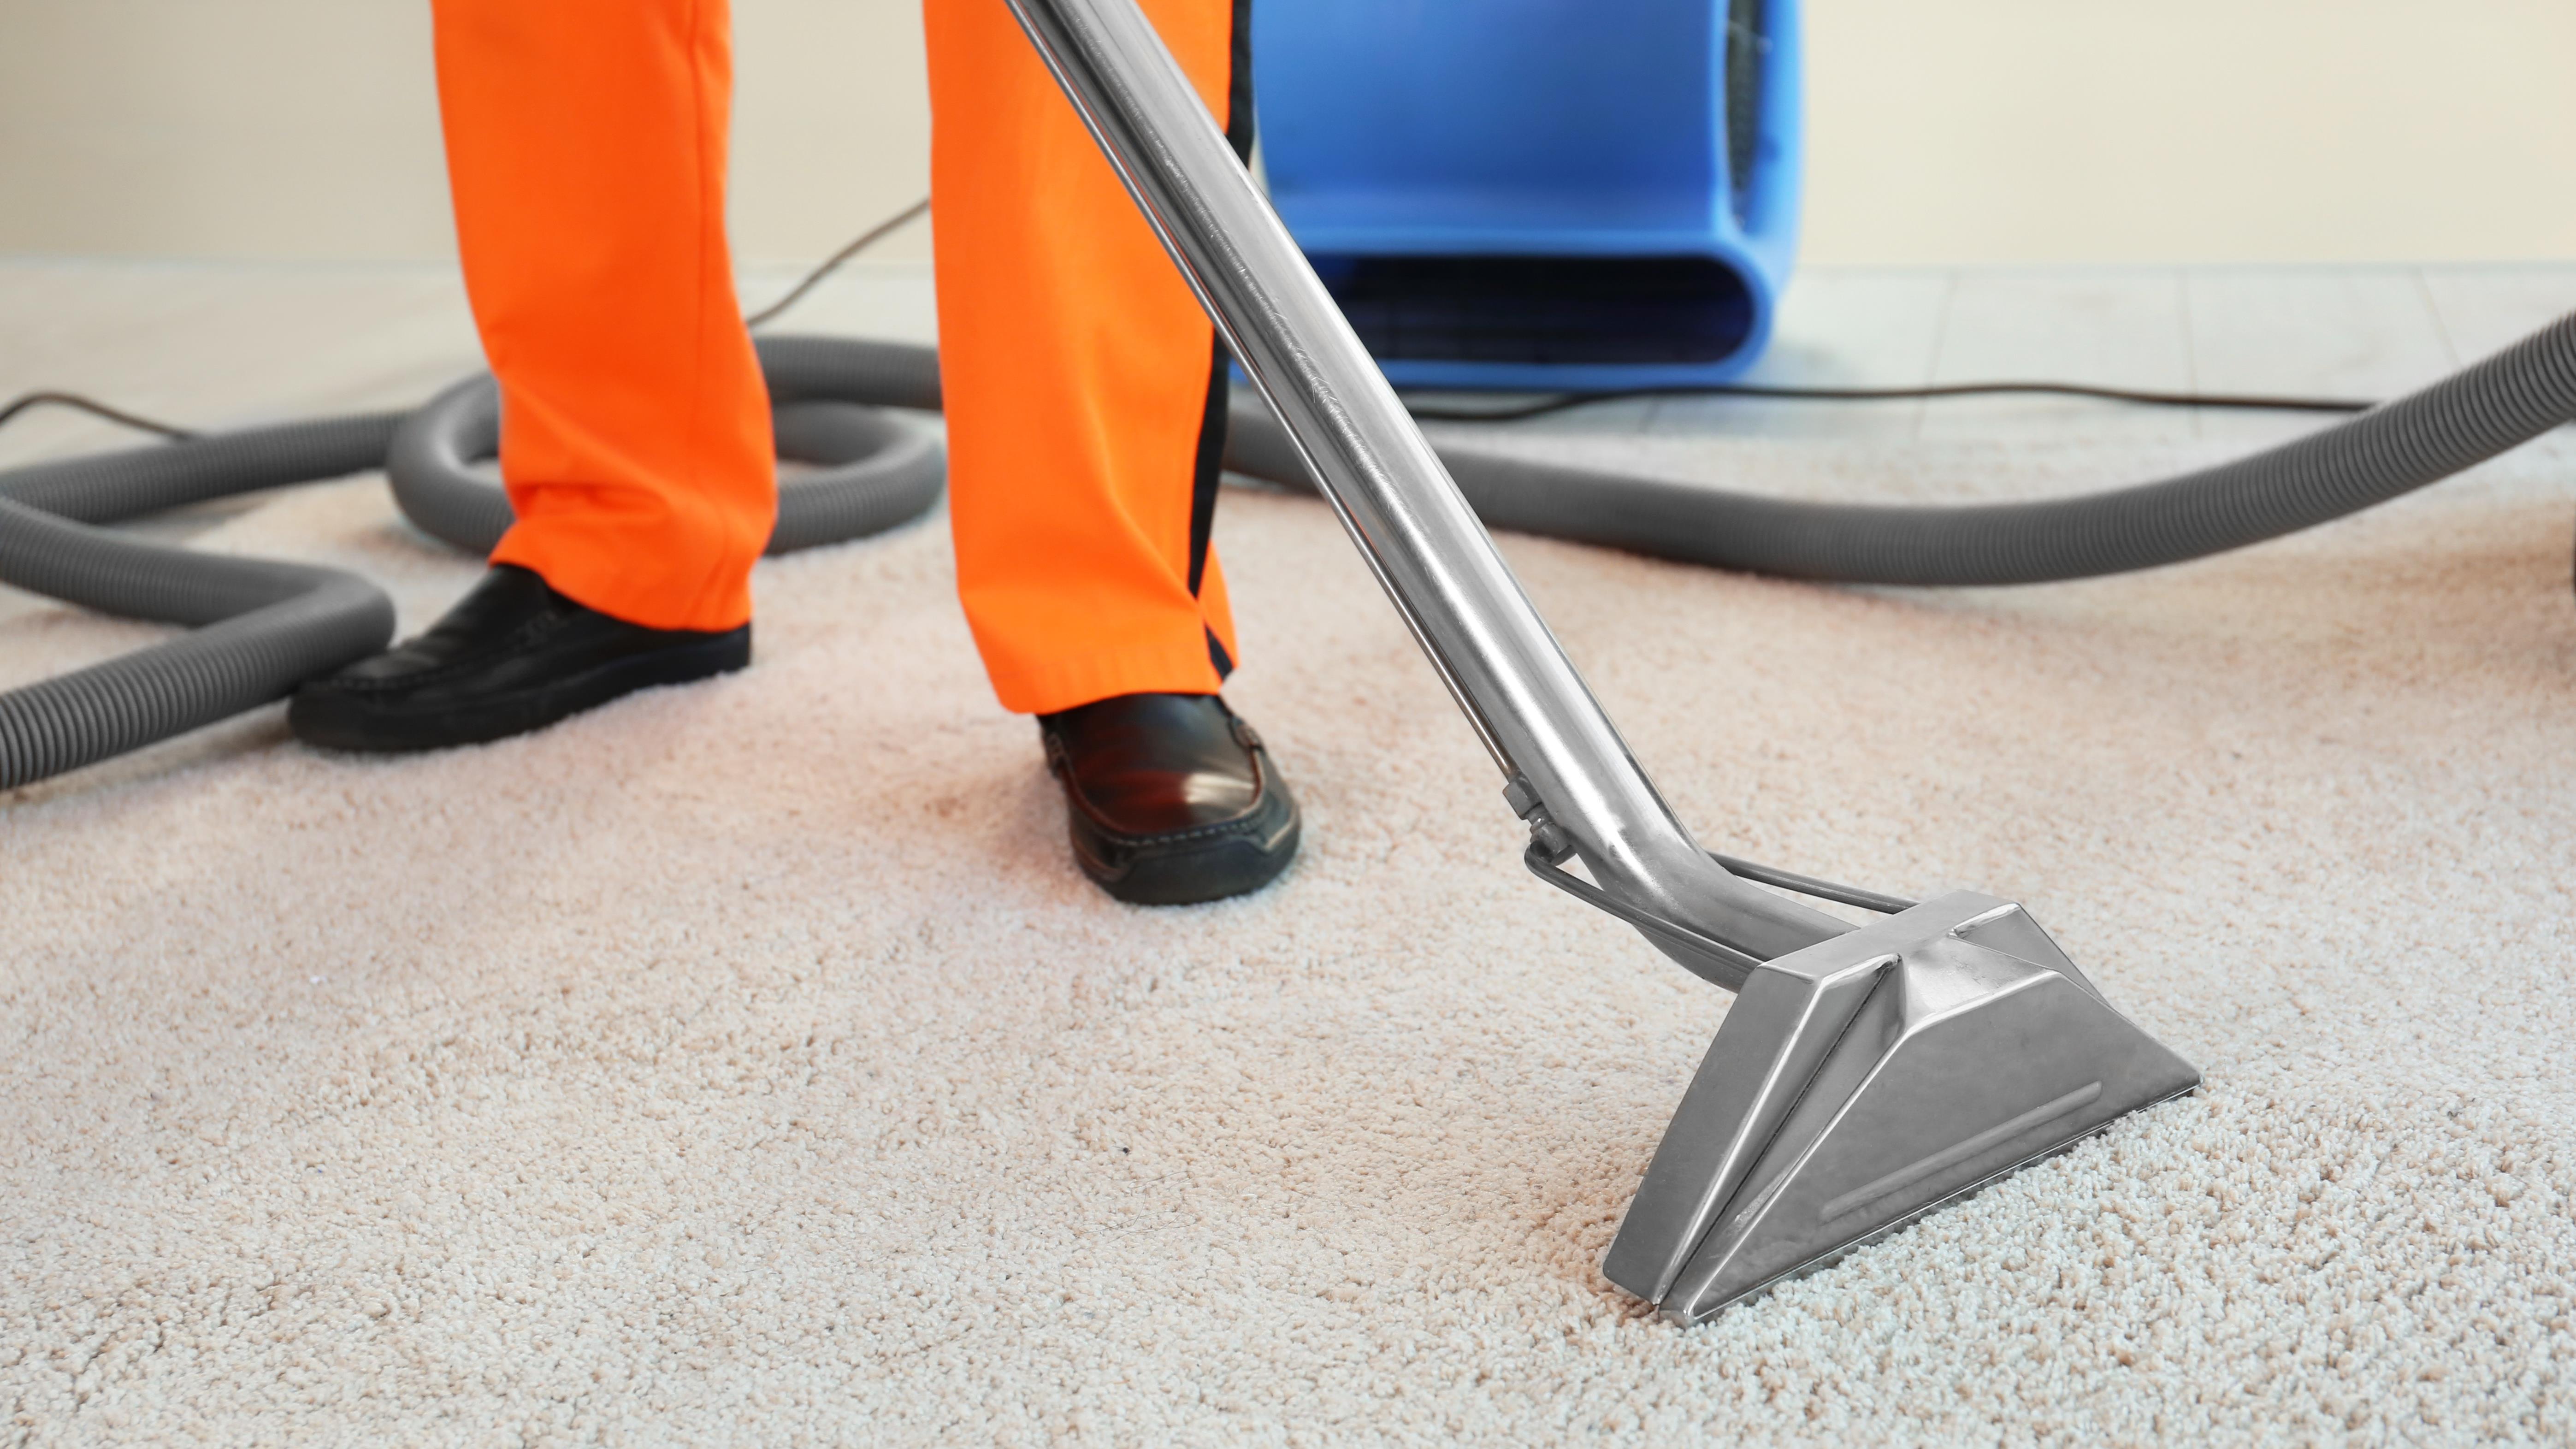 Fox Valley Carpet Cleaning/Carpet Cleaning                                                                                                                                                                                         